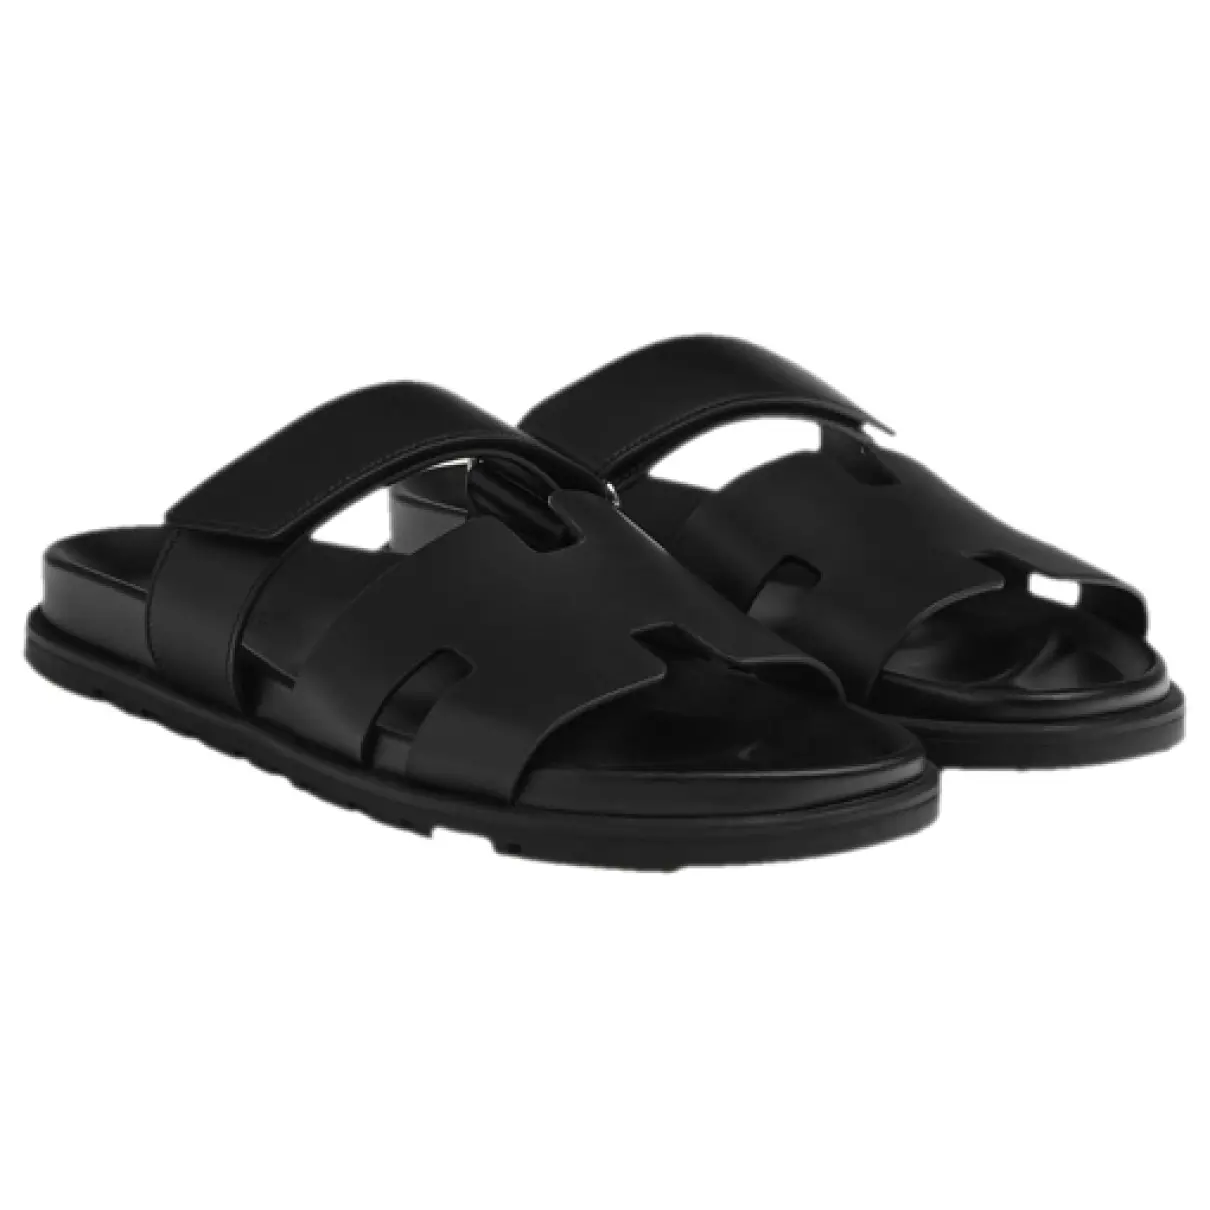 Chypre leather sandals